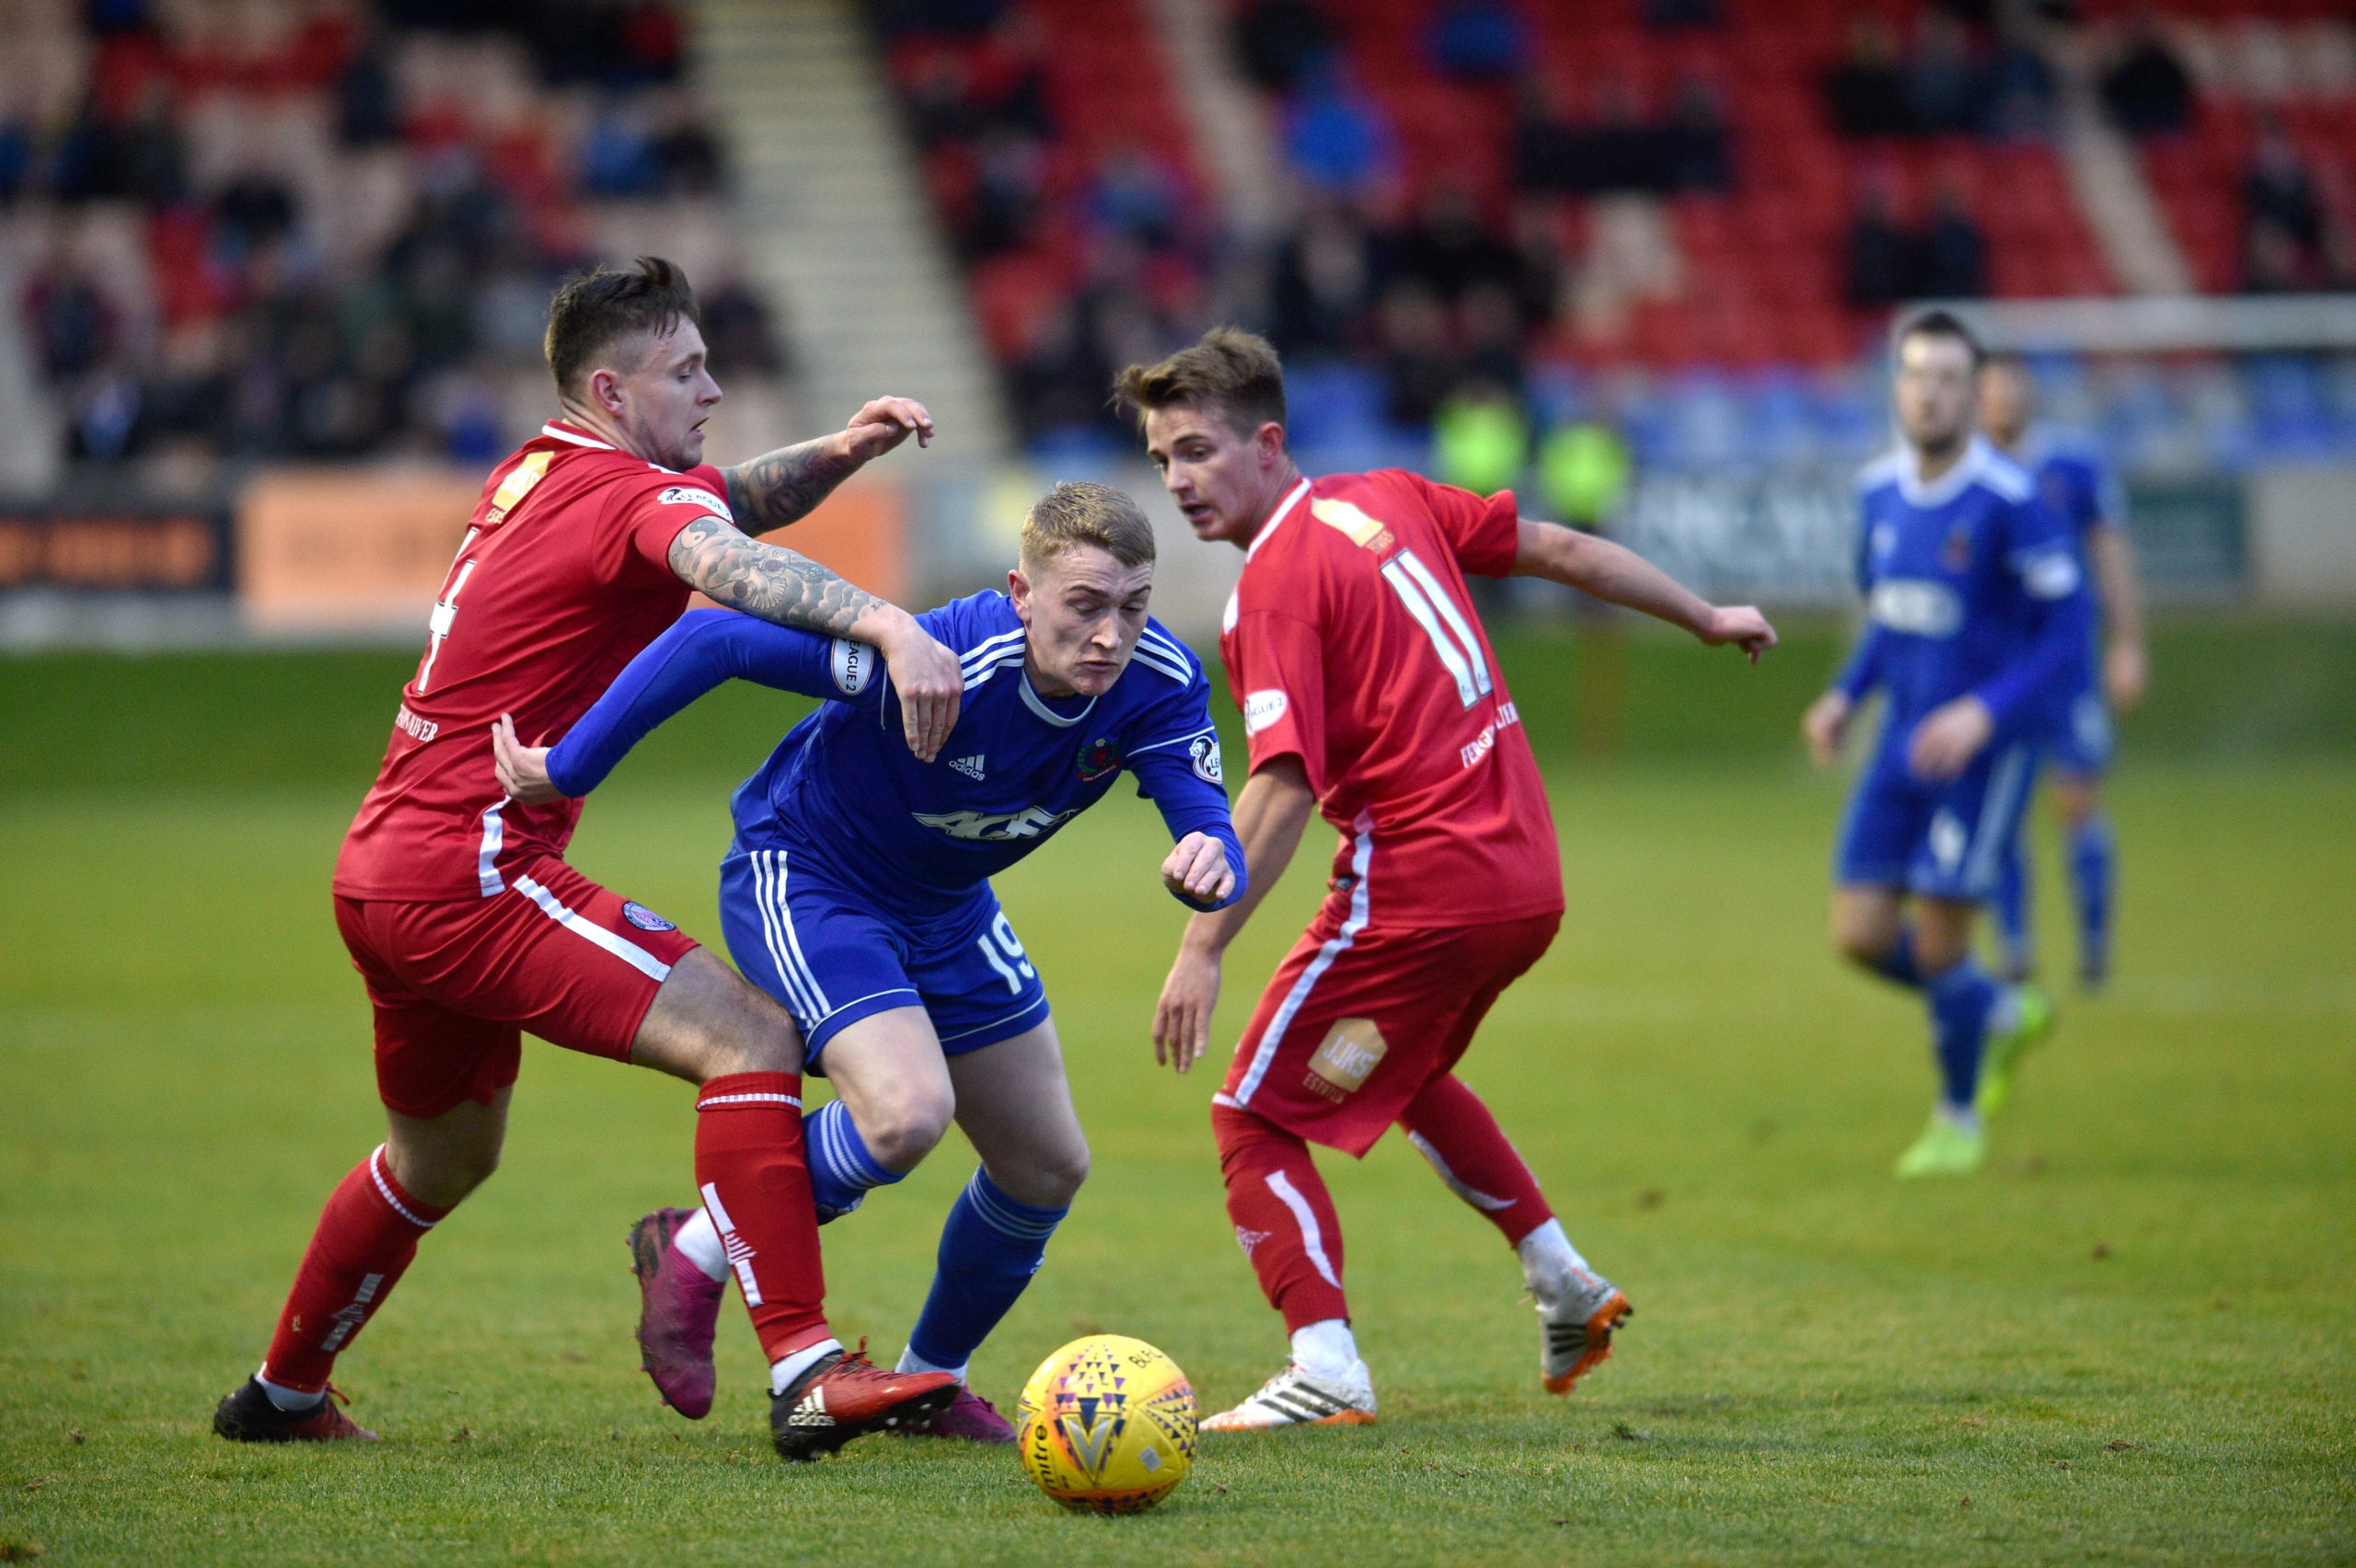 John Robertson in action against Brechin City.